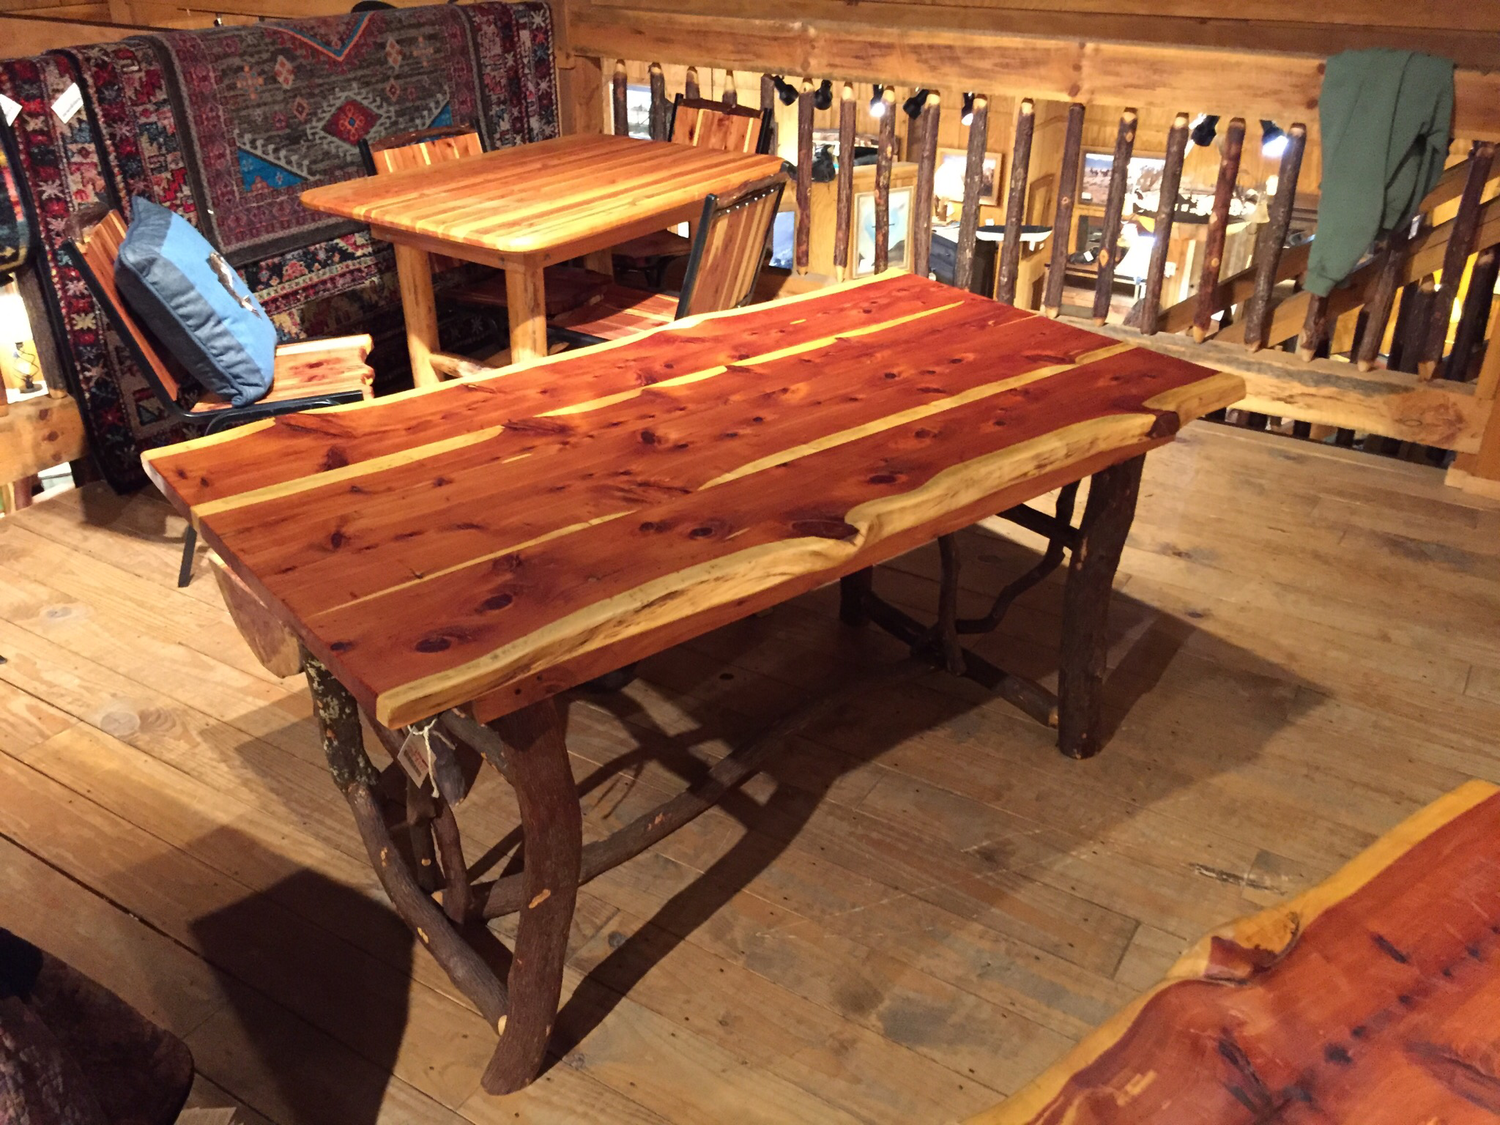 Cedar Table with Chairs